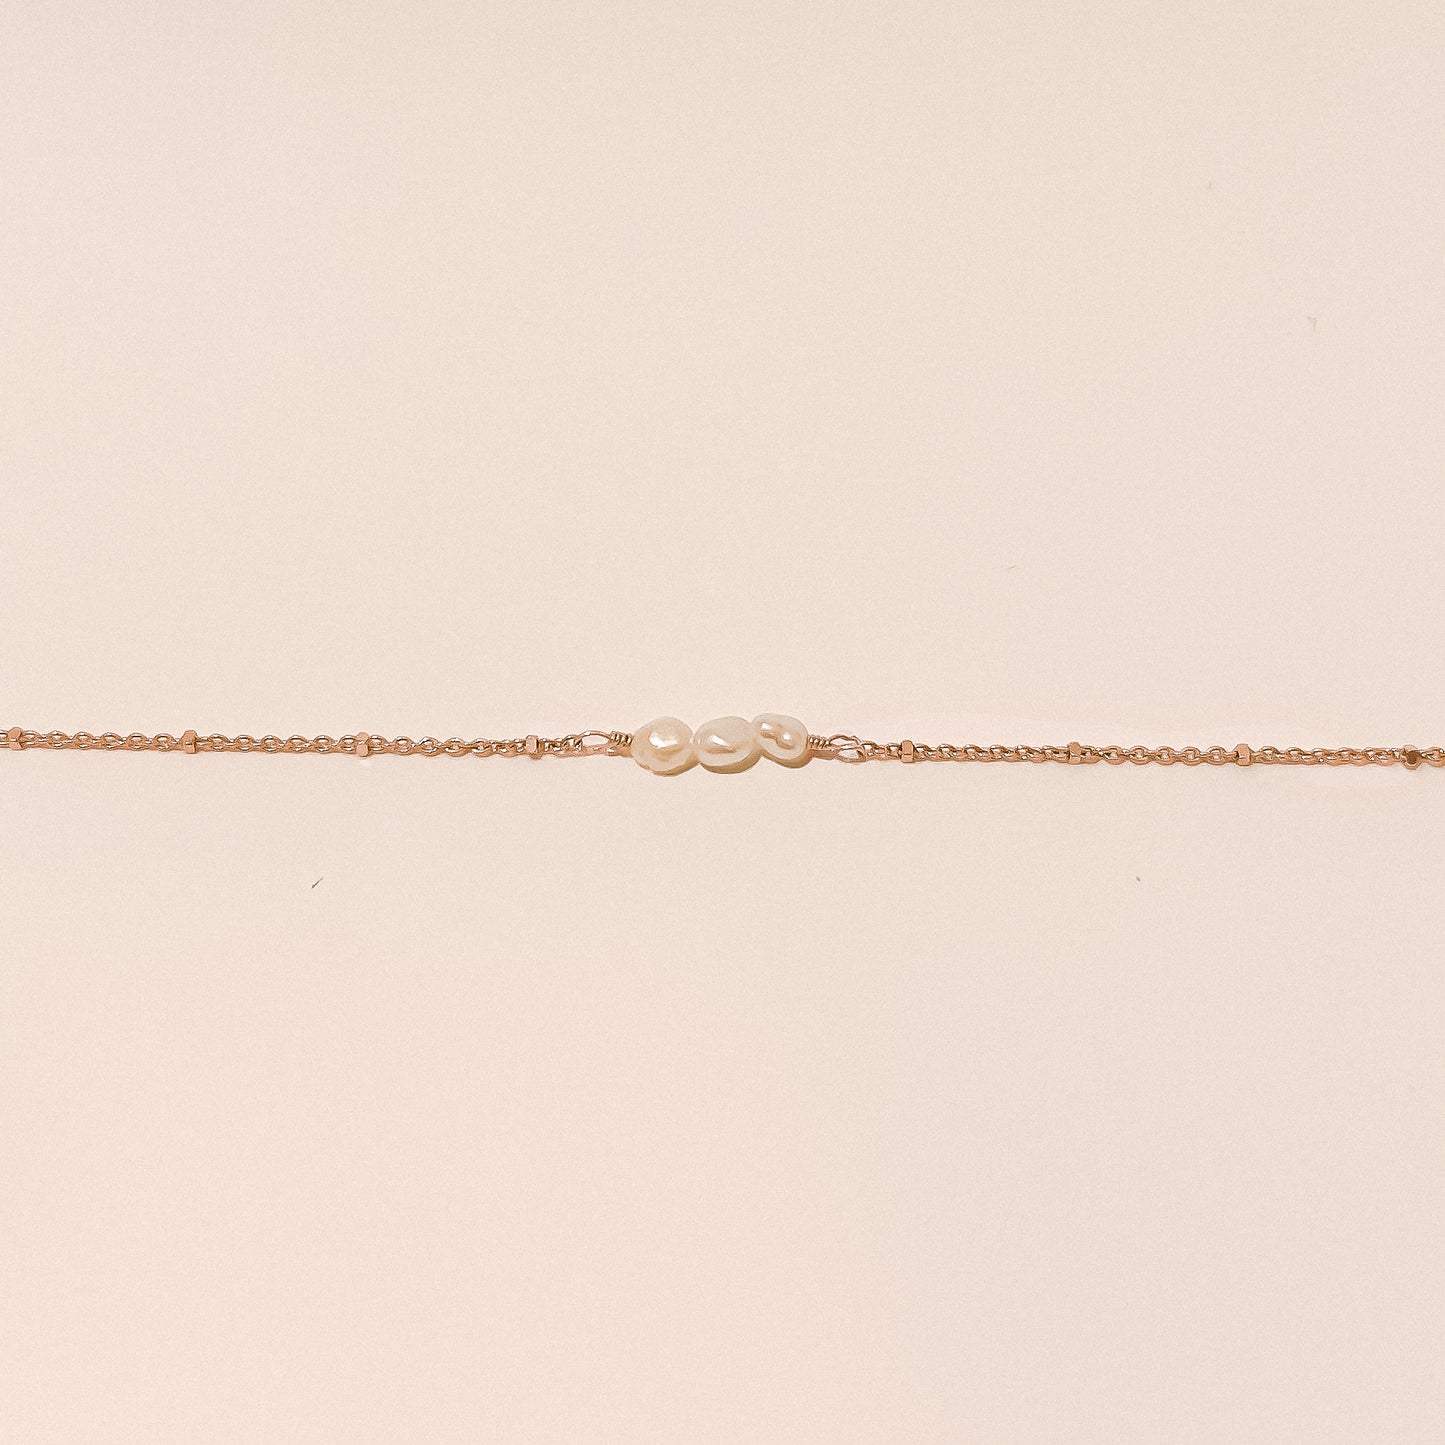 Jolie Solid 9k Gold Seed Pearl Necklace